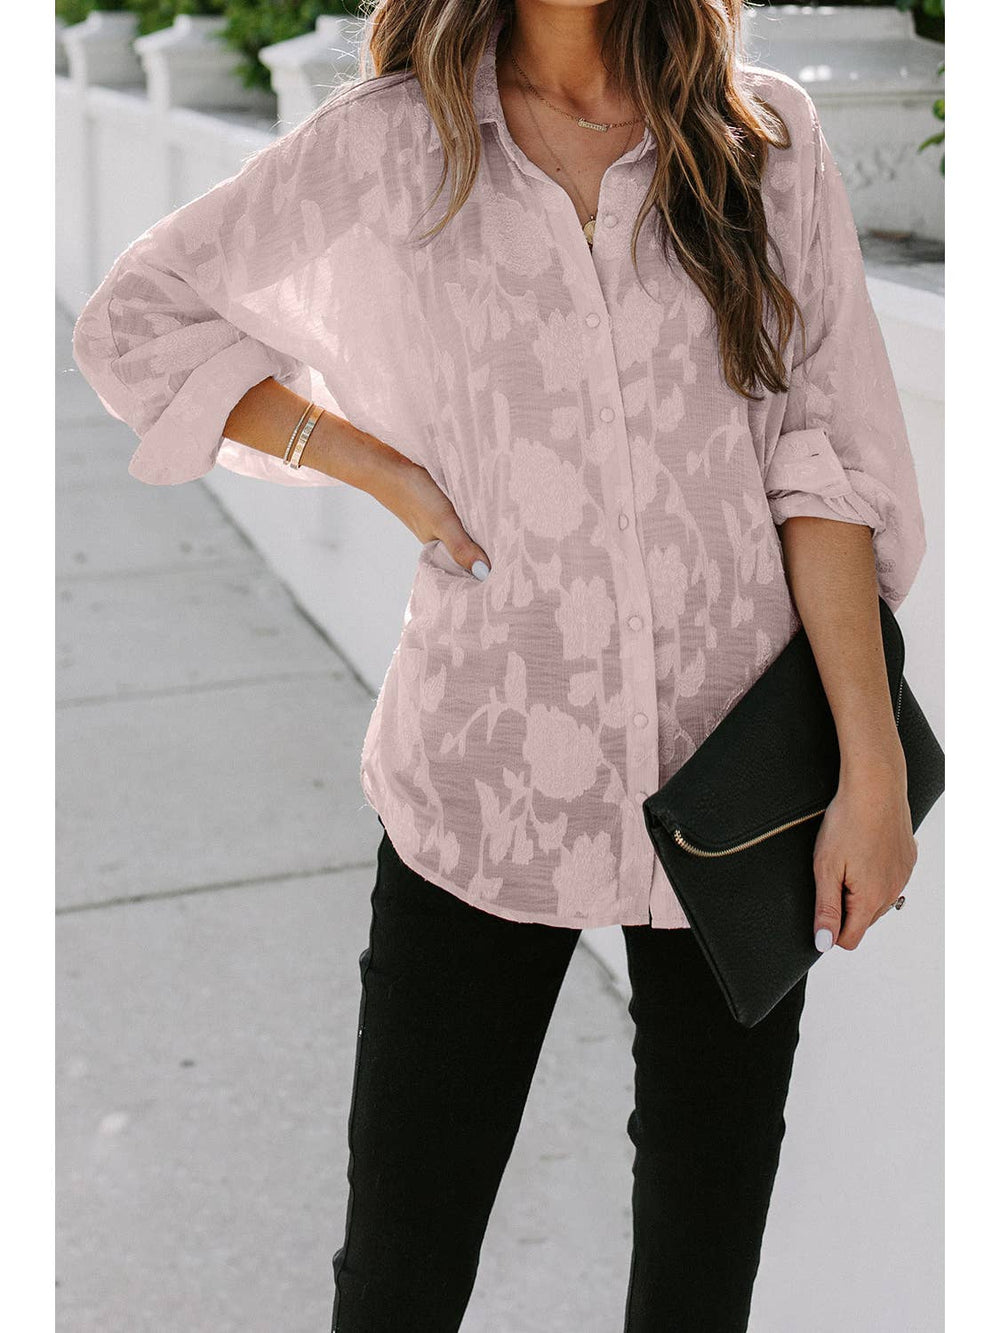 Summer Thin Sheer Top Women Solid Color Long-Sleeved Shirt